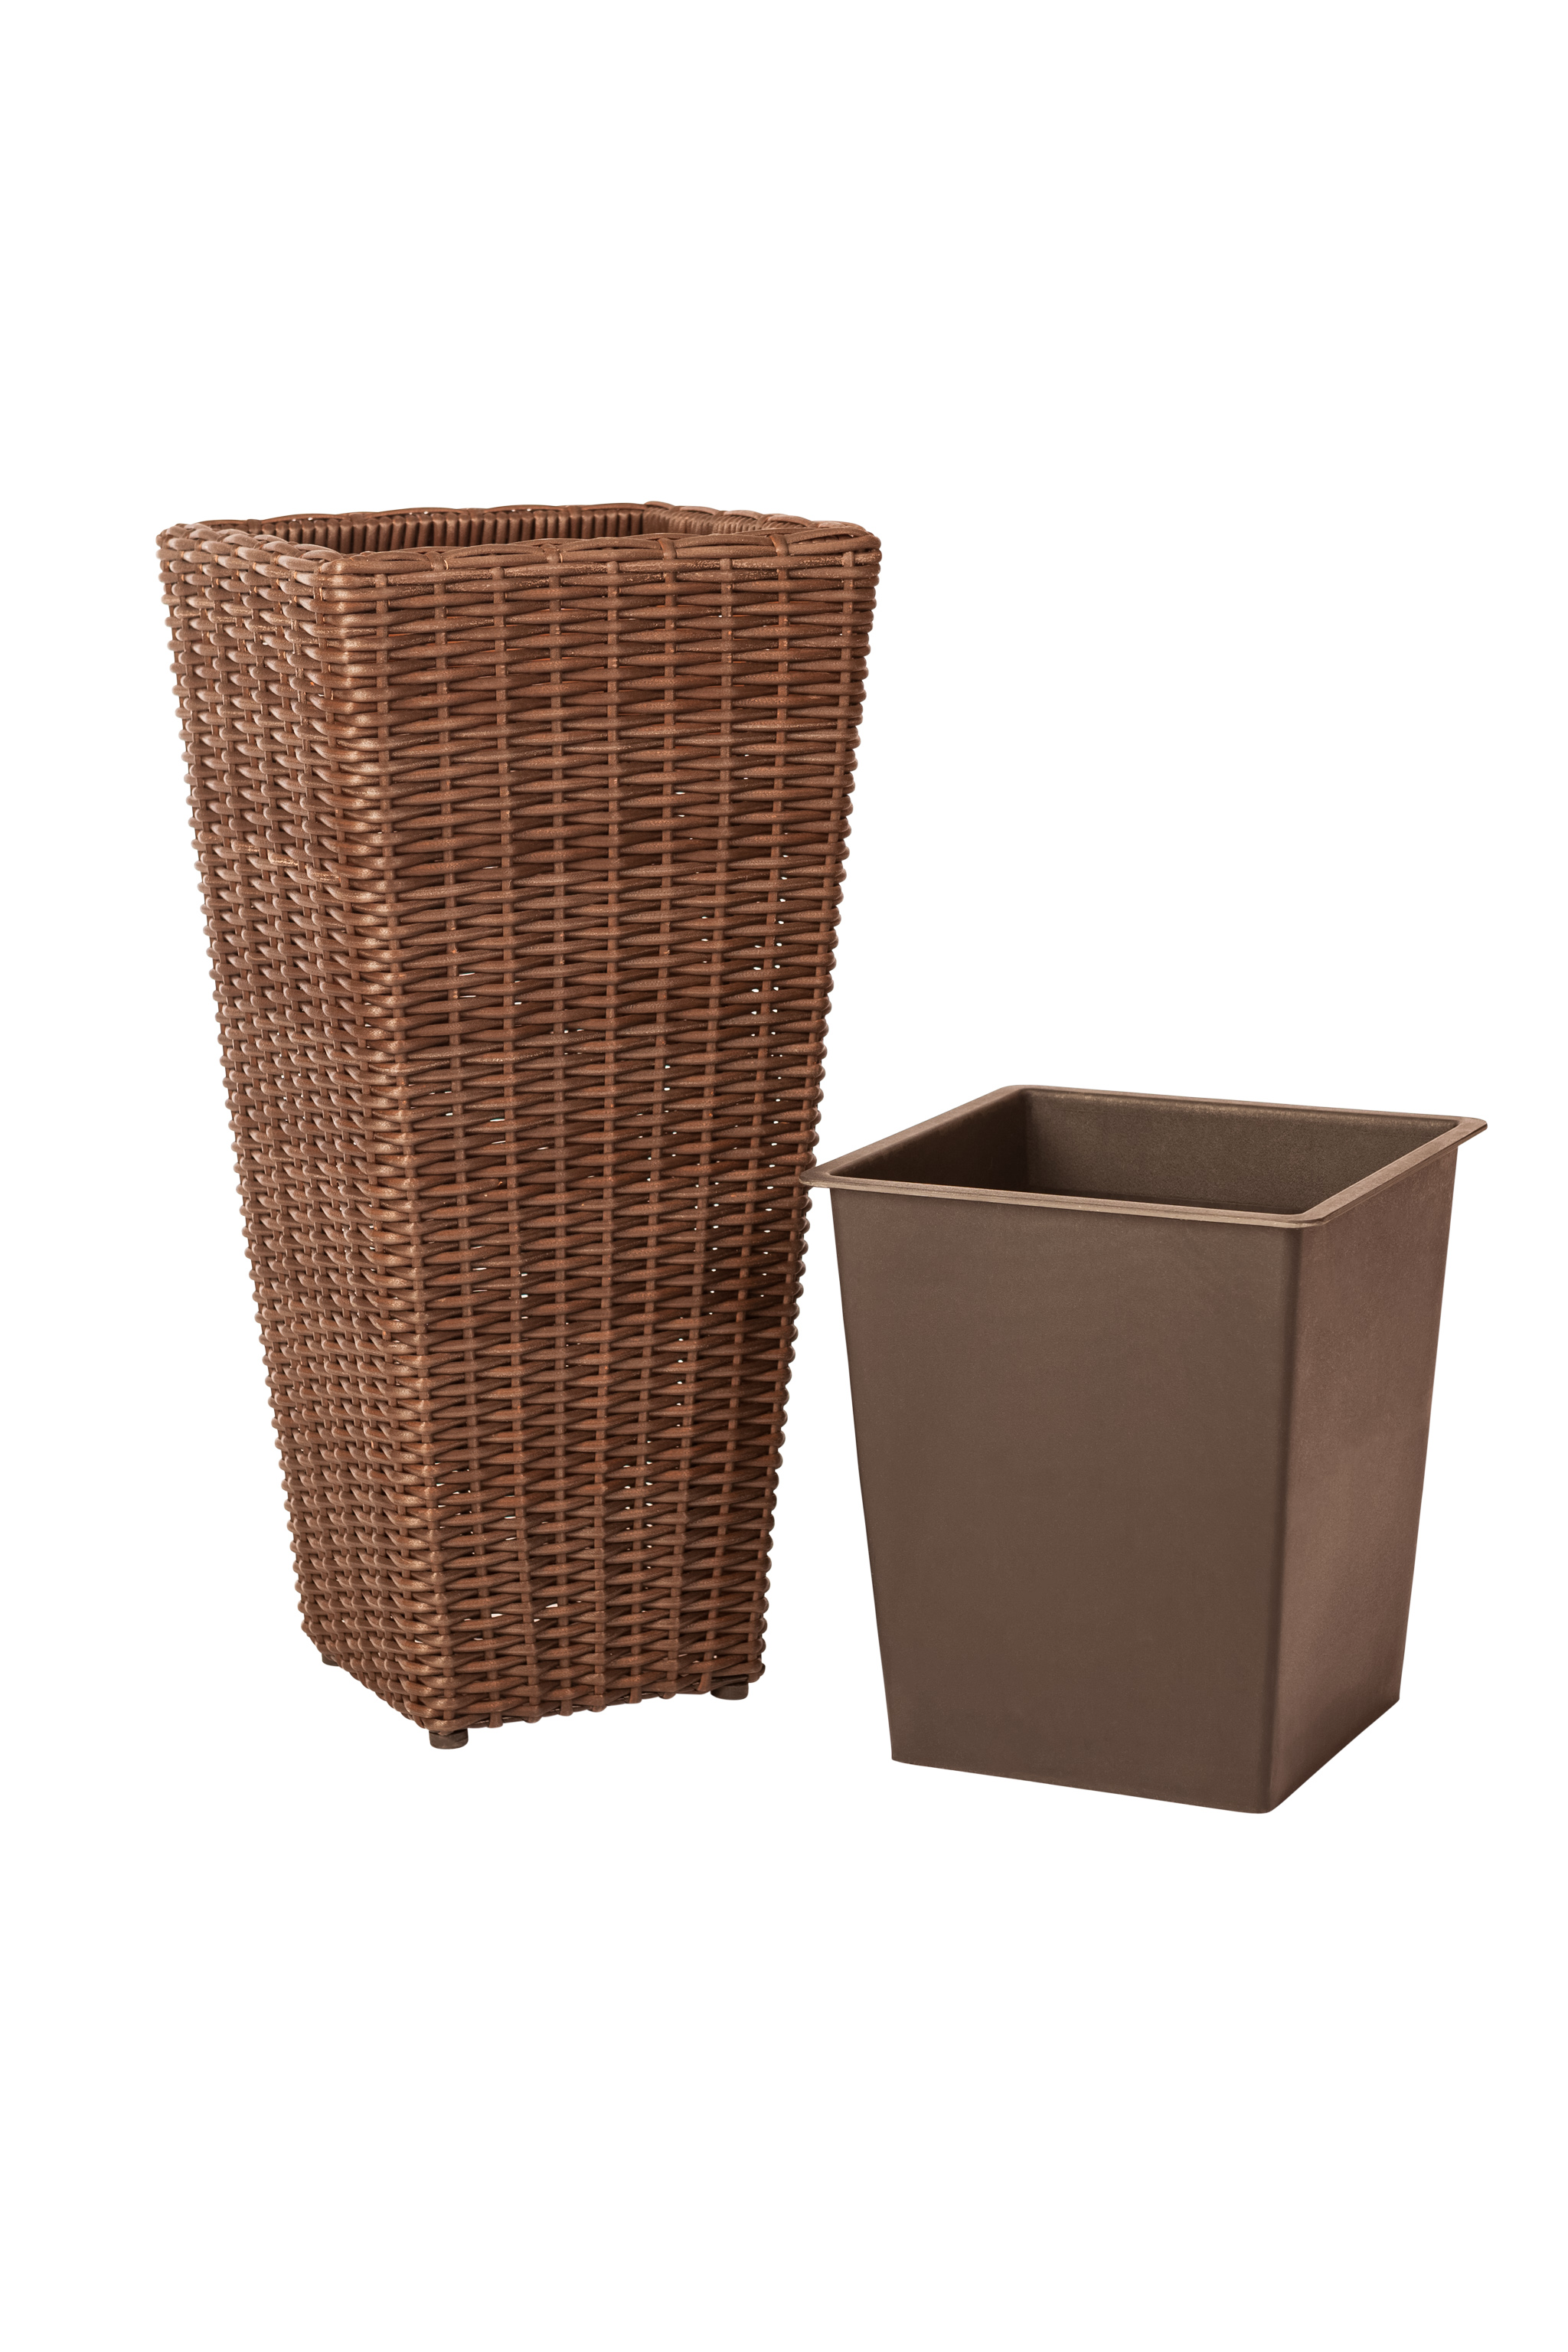 Patio Sense 11" x 11" x 23" Round Brown Resin Plant Planter with Drainage Hole (2 Piece) - image 2 of 9